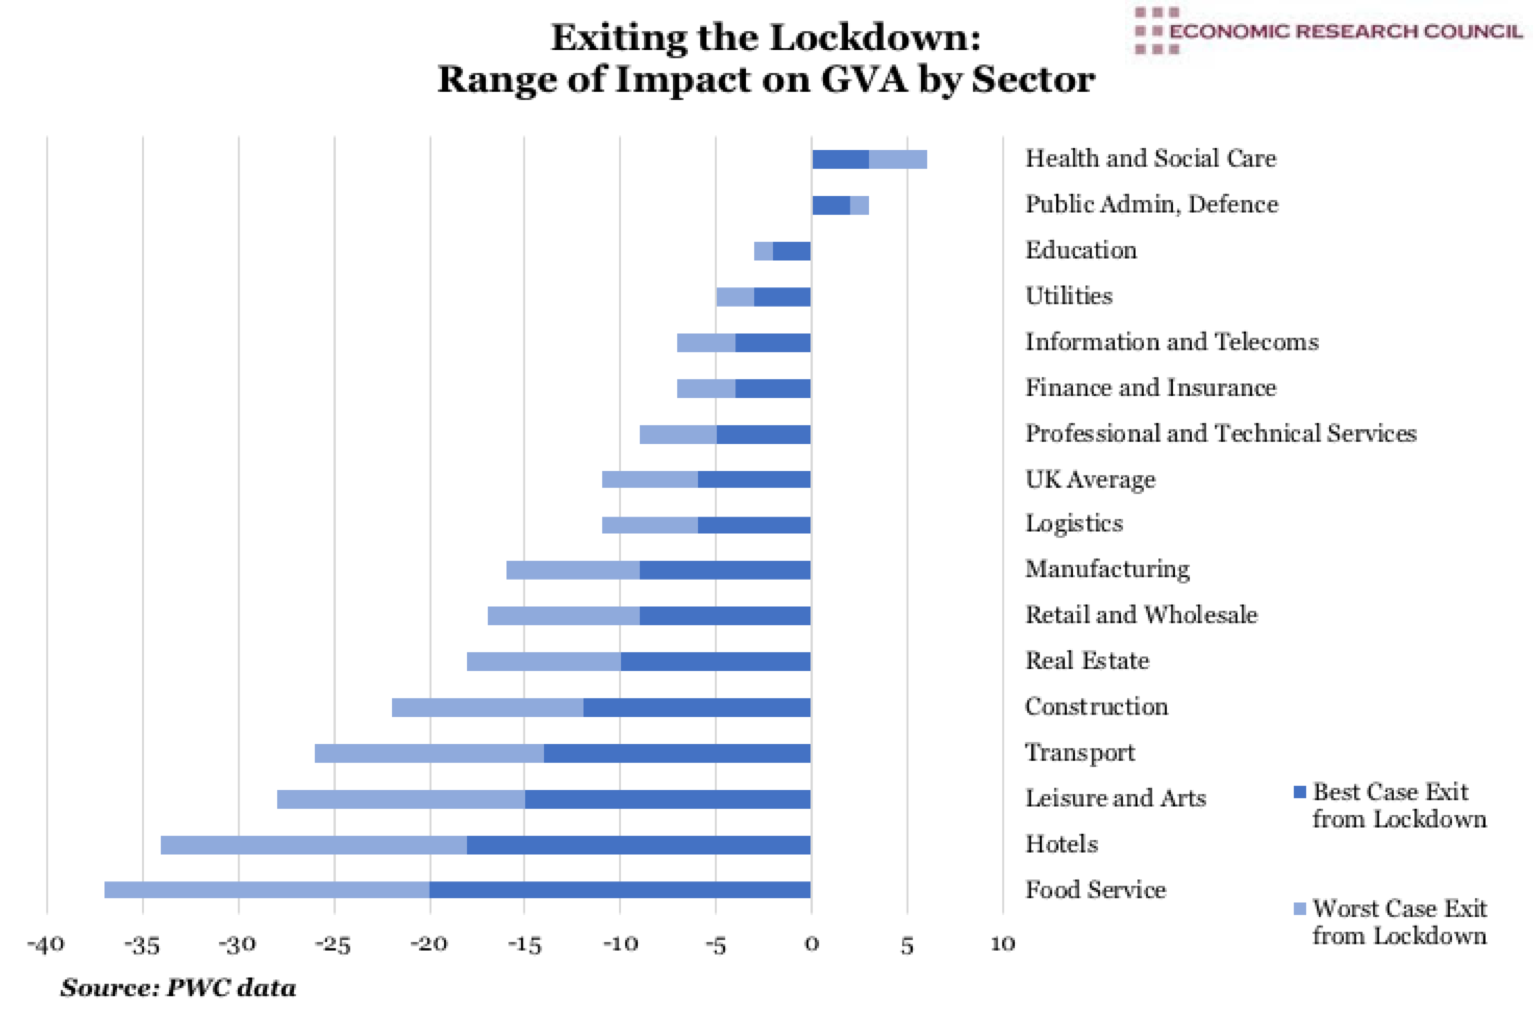 Exiting the Lockdown: The Range of Impact on GVA by Sector